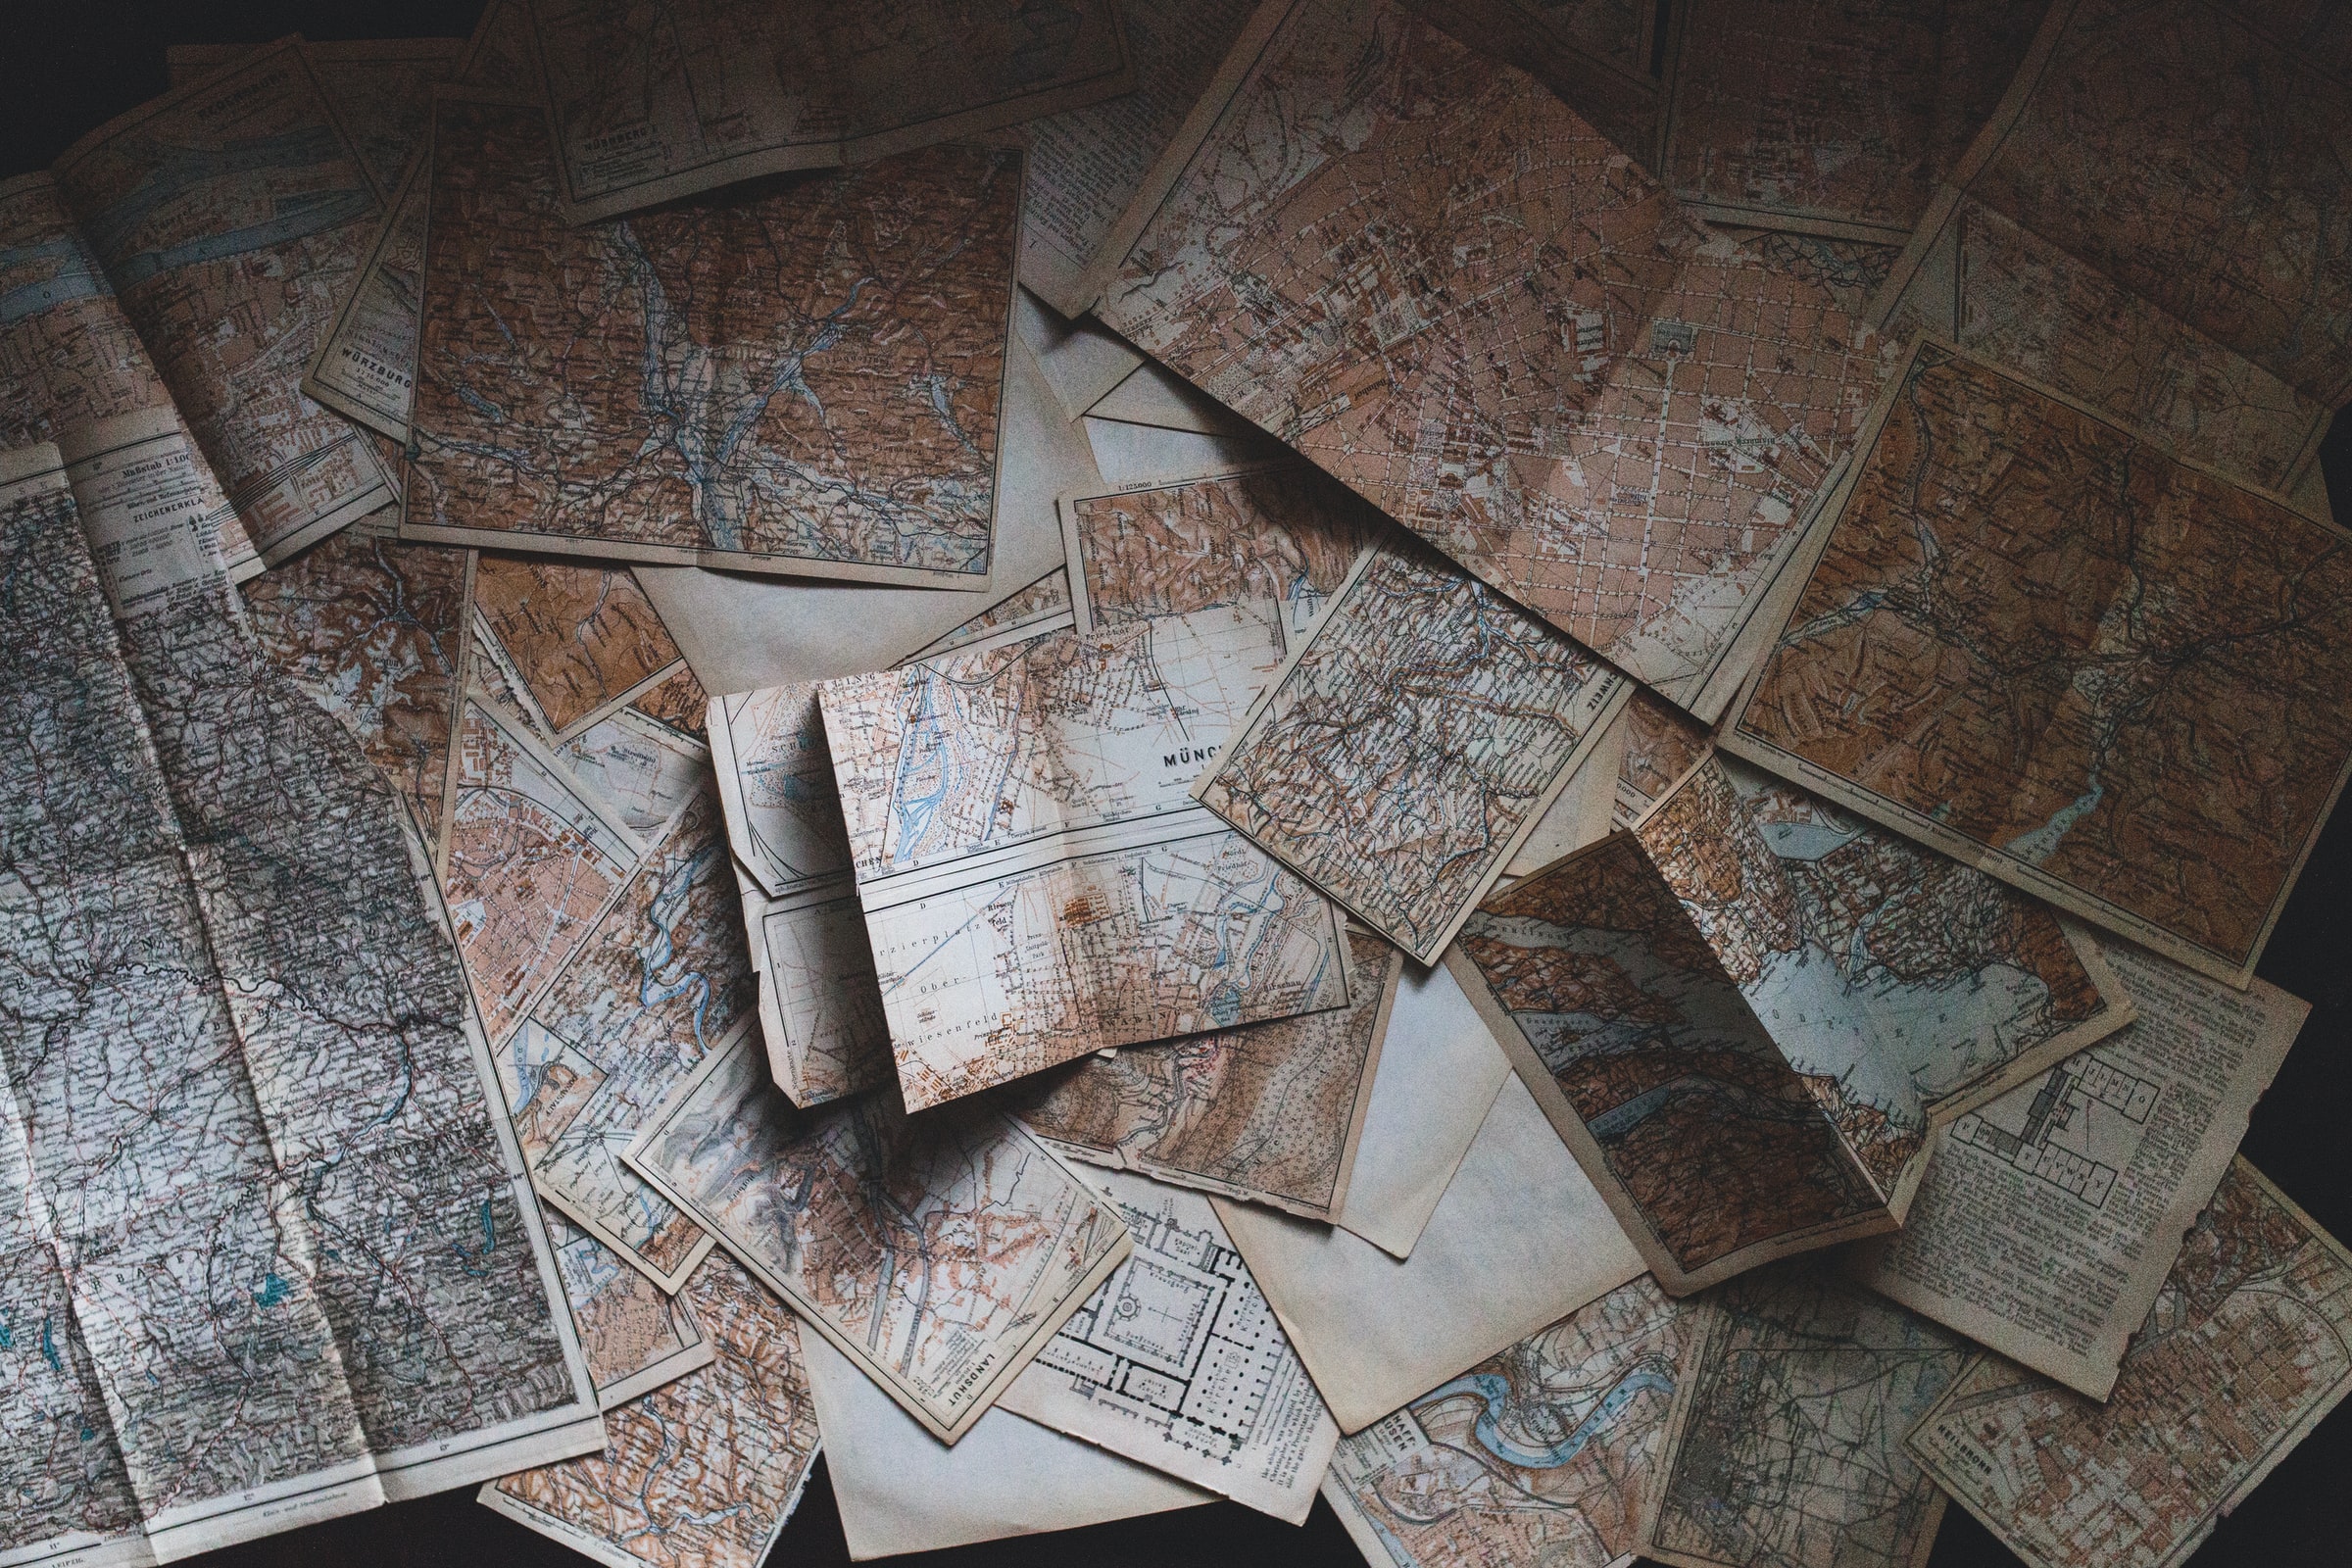 Decorative, image of multiple maps laying open and unfolded